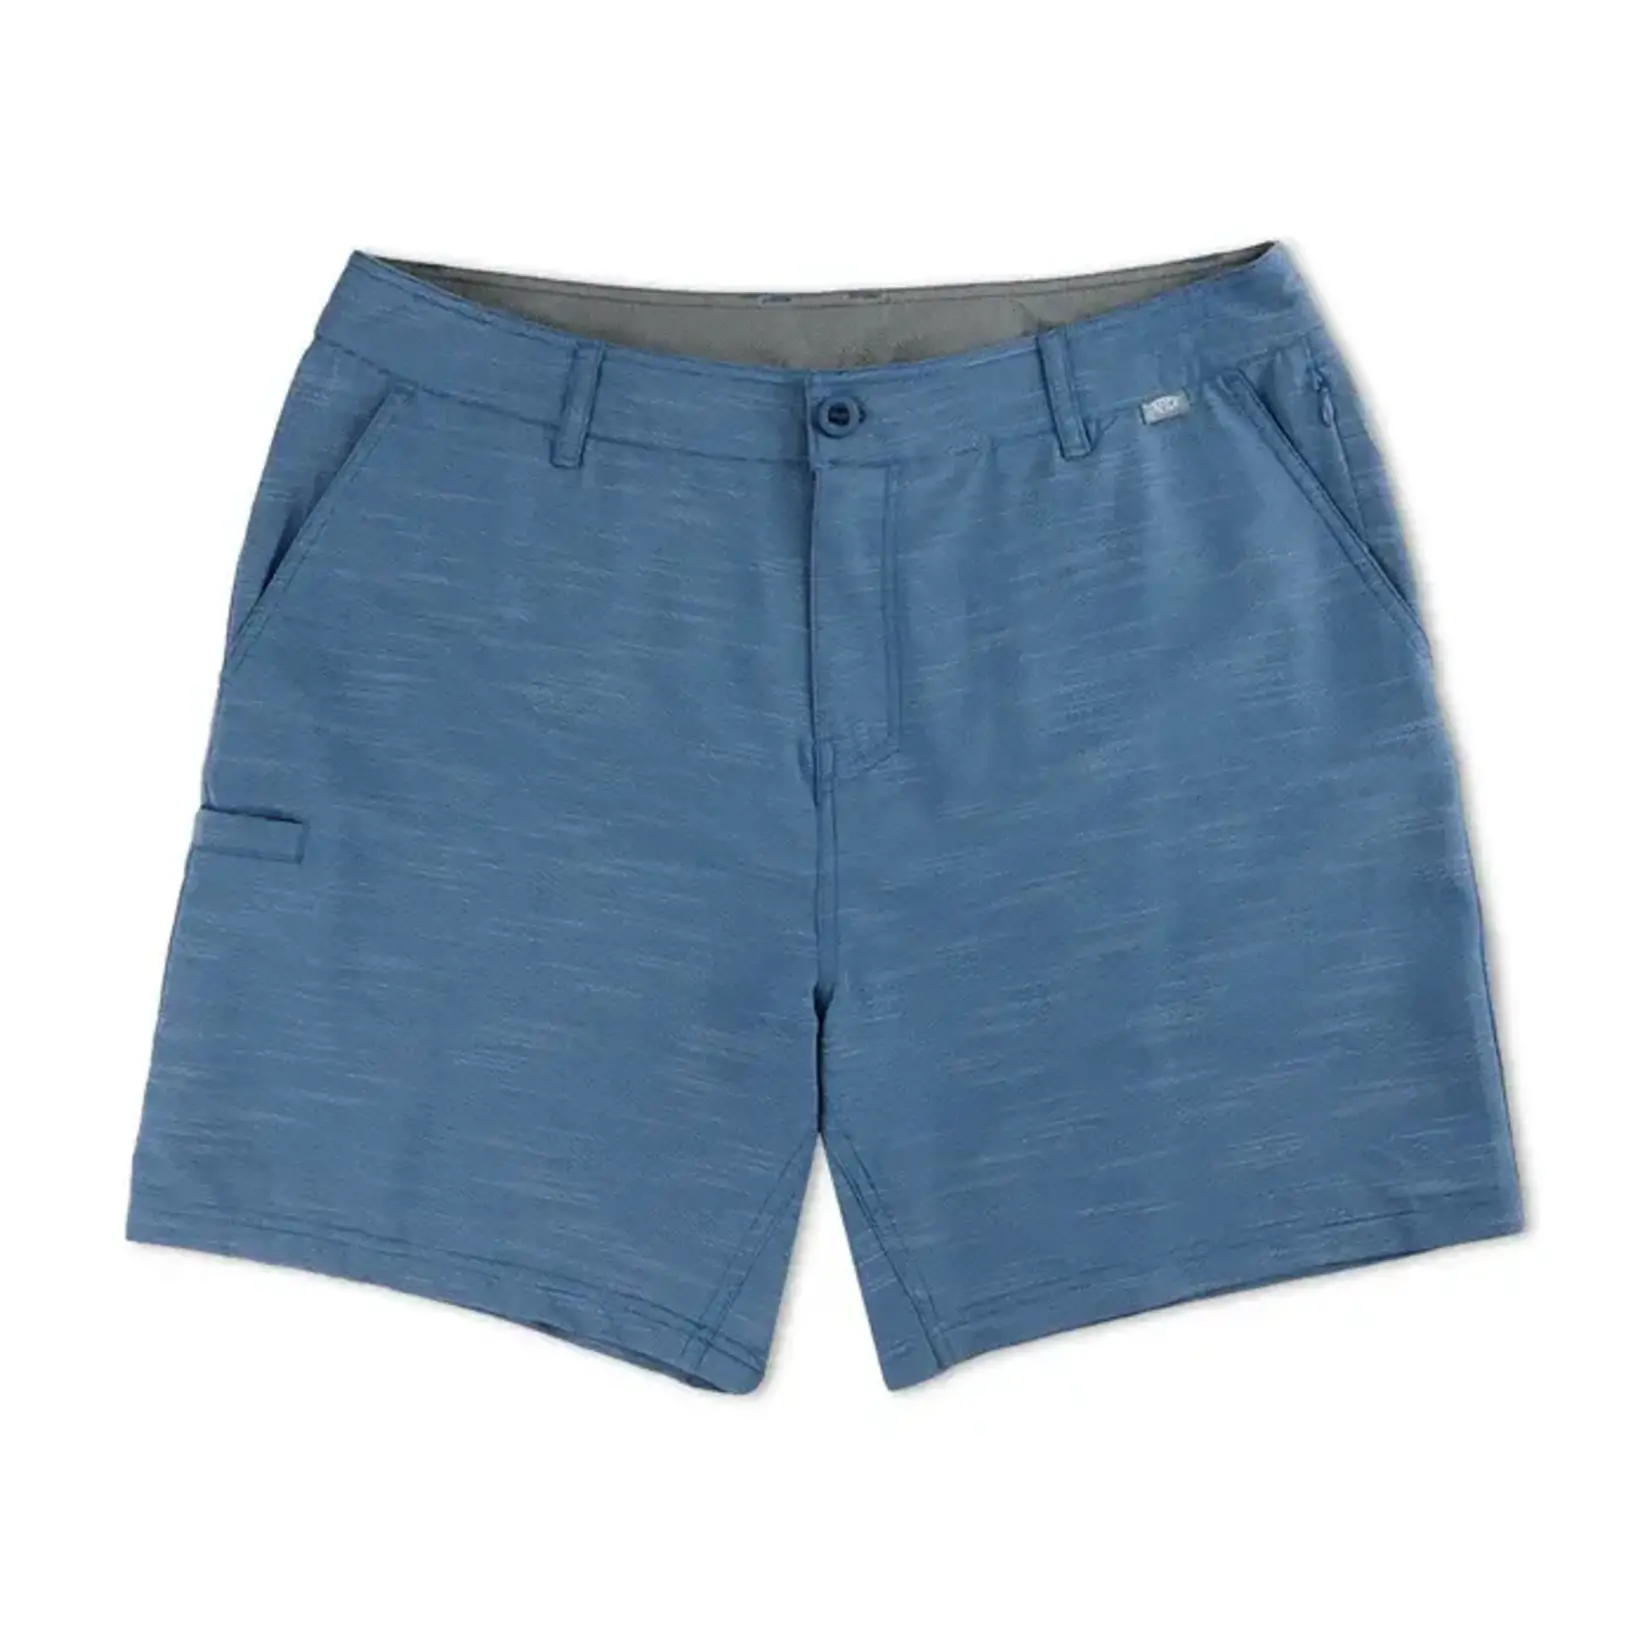 Aftco Aftco 365 Men's Hybrid Chino Shorts